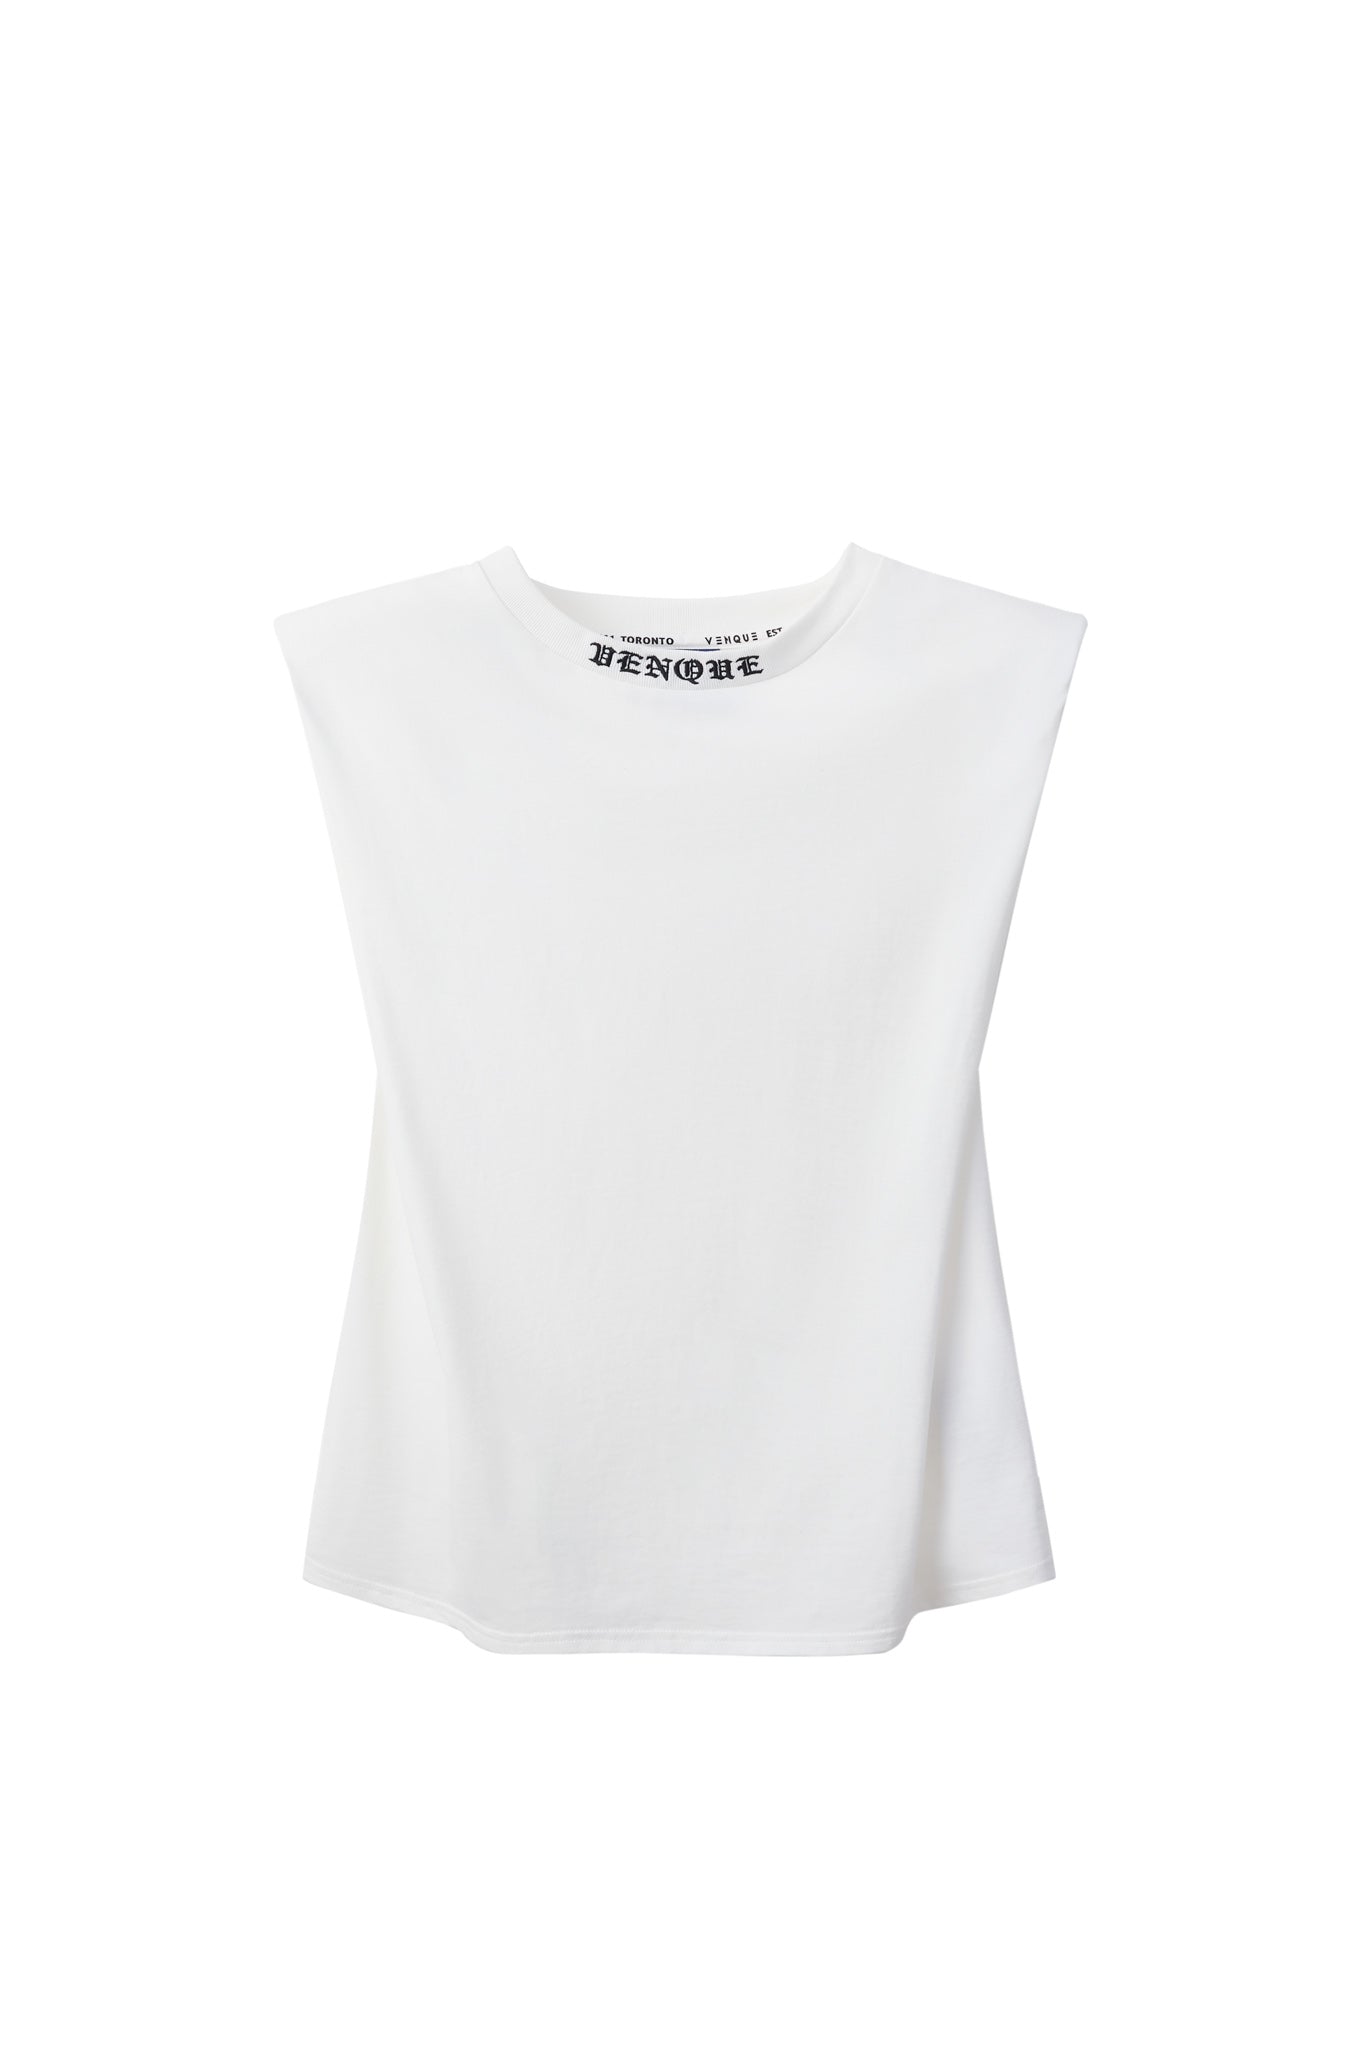 "Padded Shoulder Muscle" T-shirt